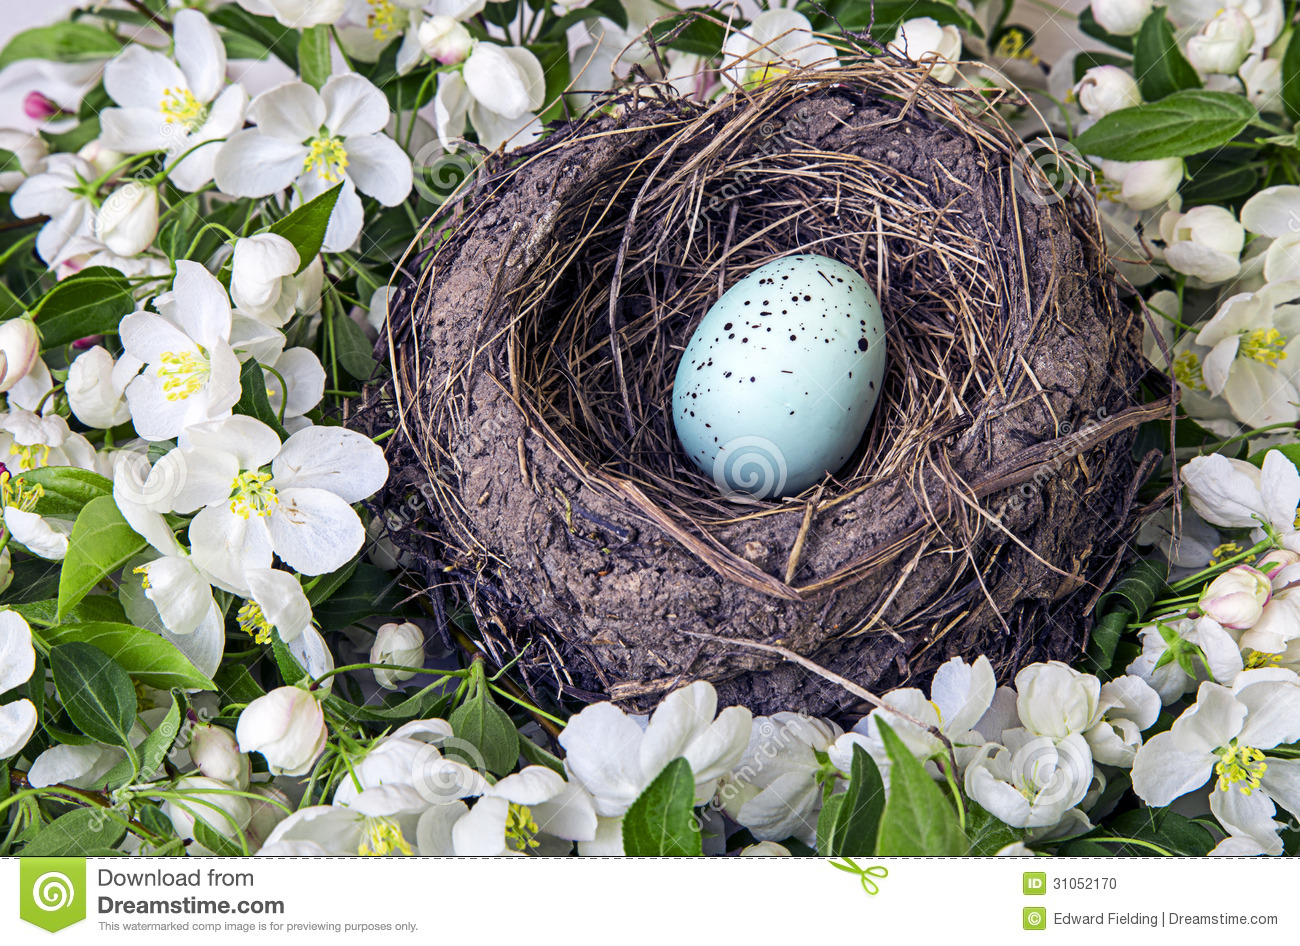 Robin S Nest With Blue Egg And Flowers Stock Photo   Image  31052170